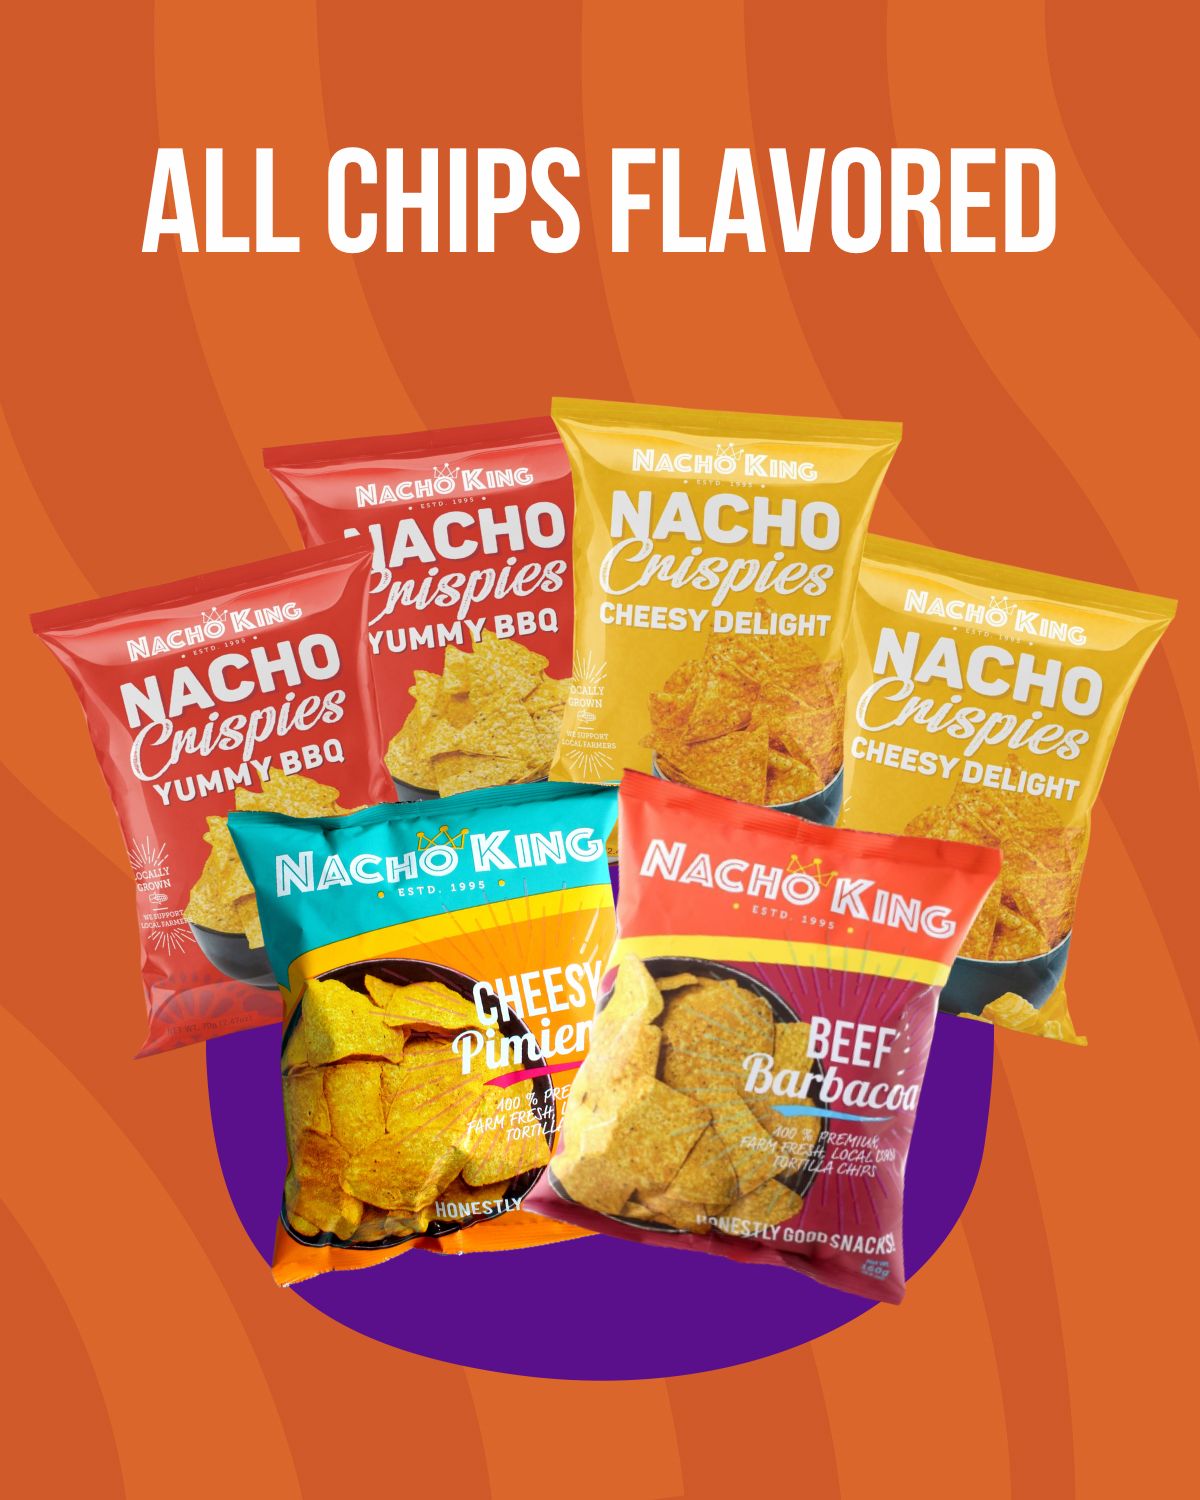 All Chips Flavored